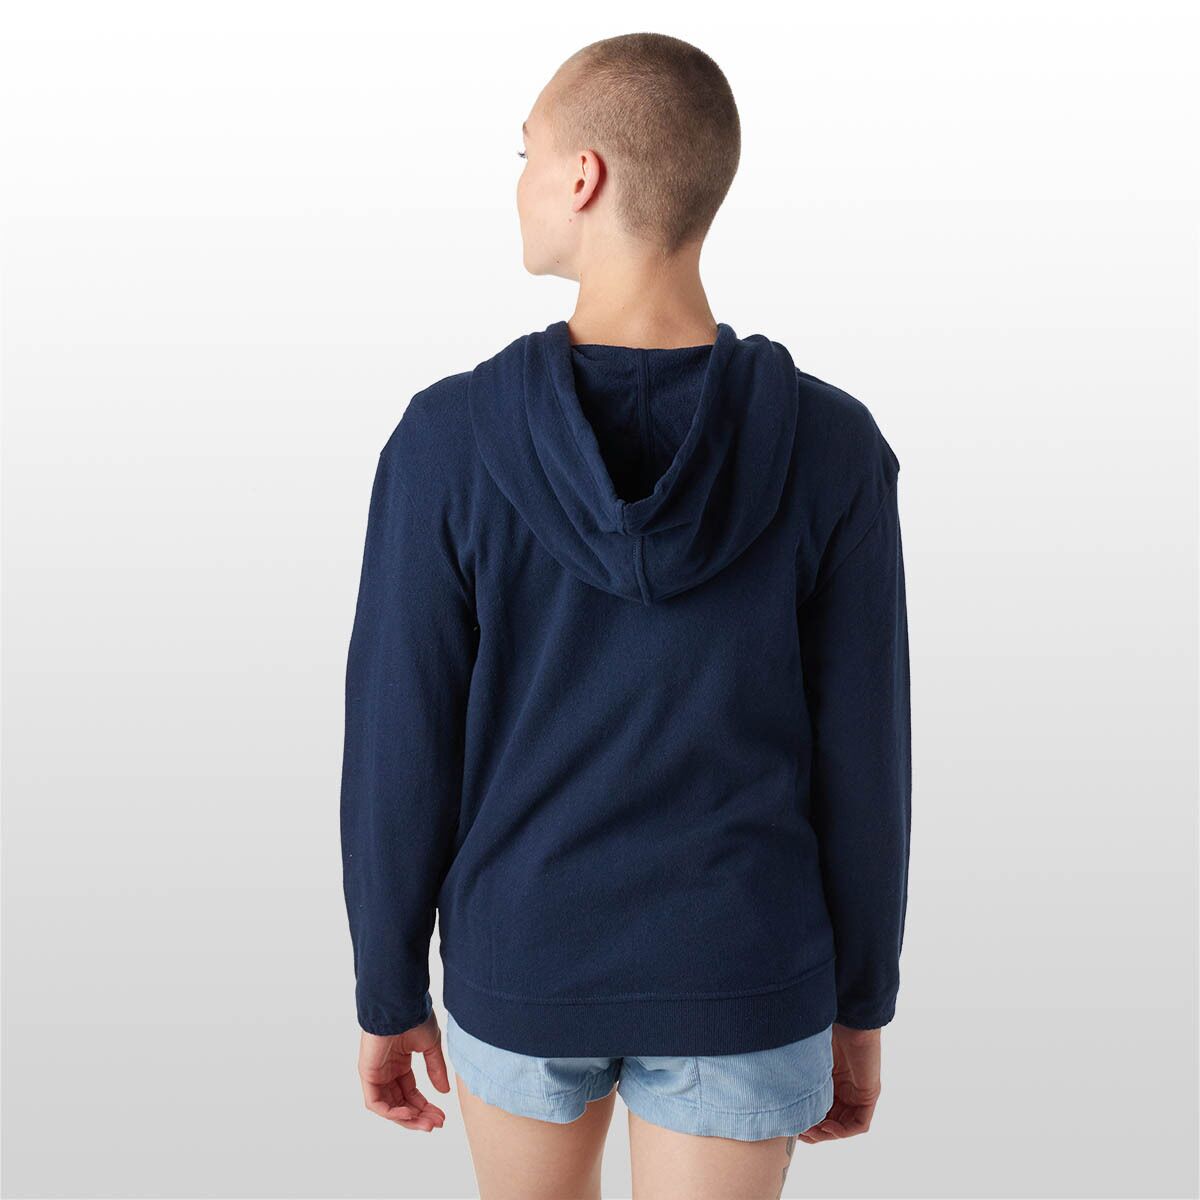 Patagonia Organic Cotton French Terry Hoodie - Women's - Clothing